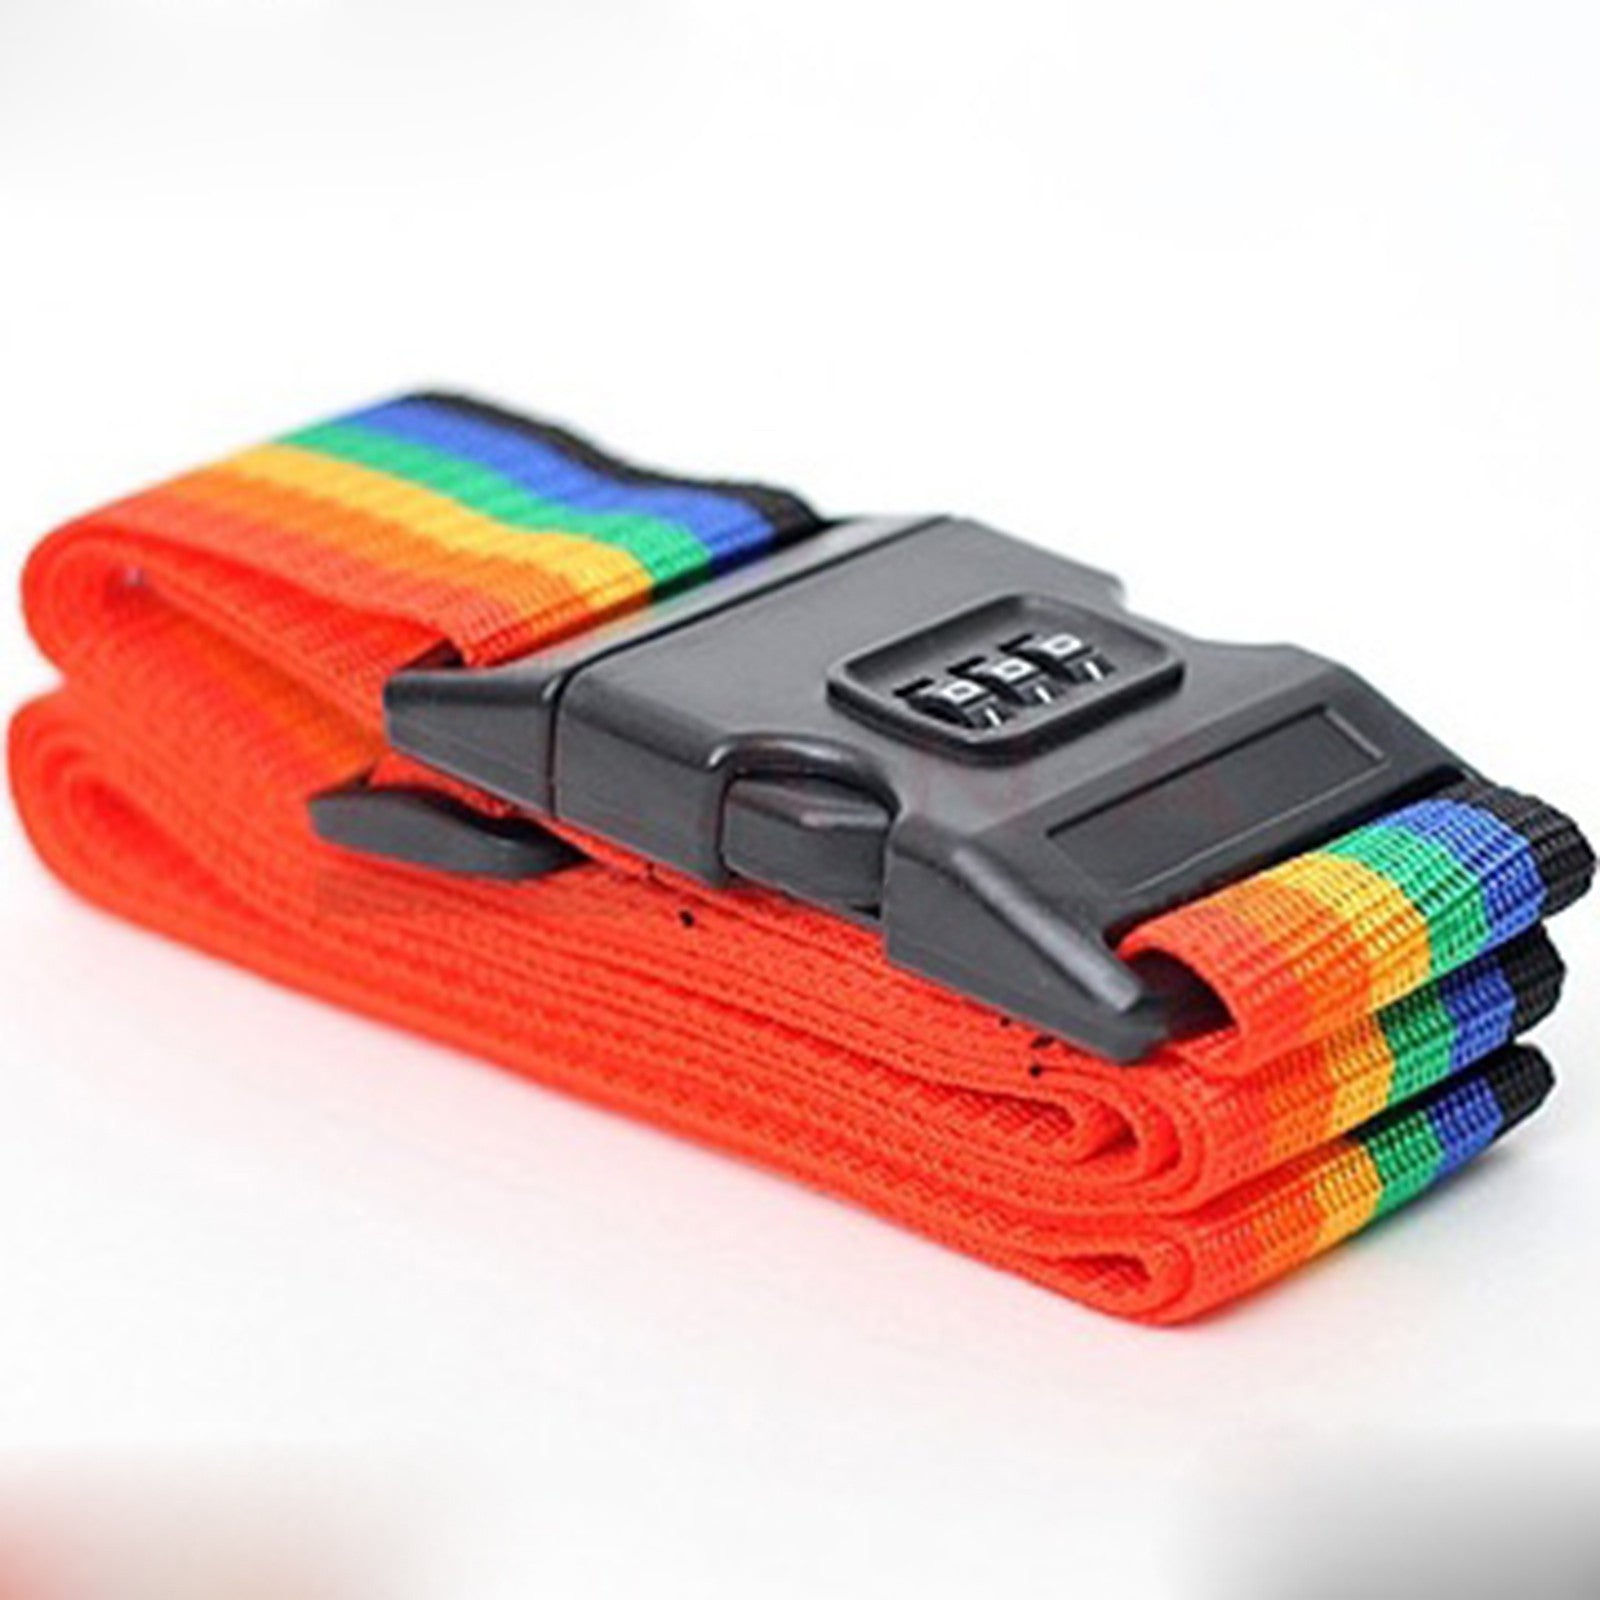 LUGGAGE STRAP WITH COMBINATION LOCK